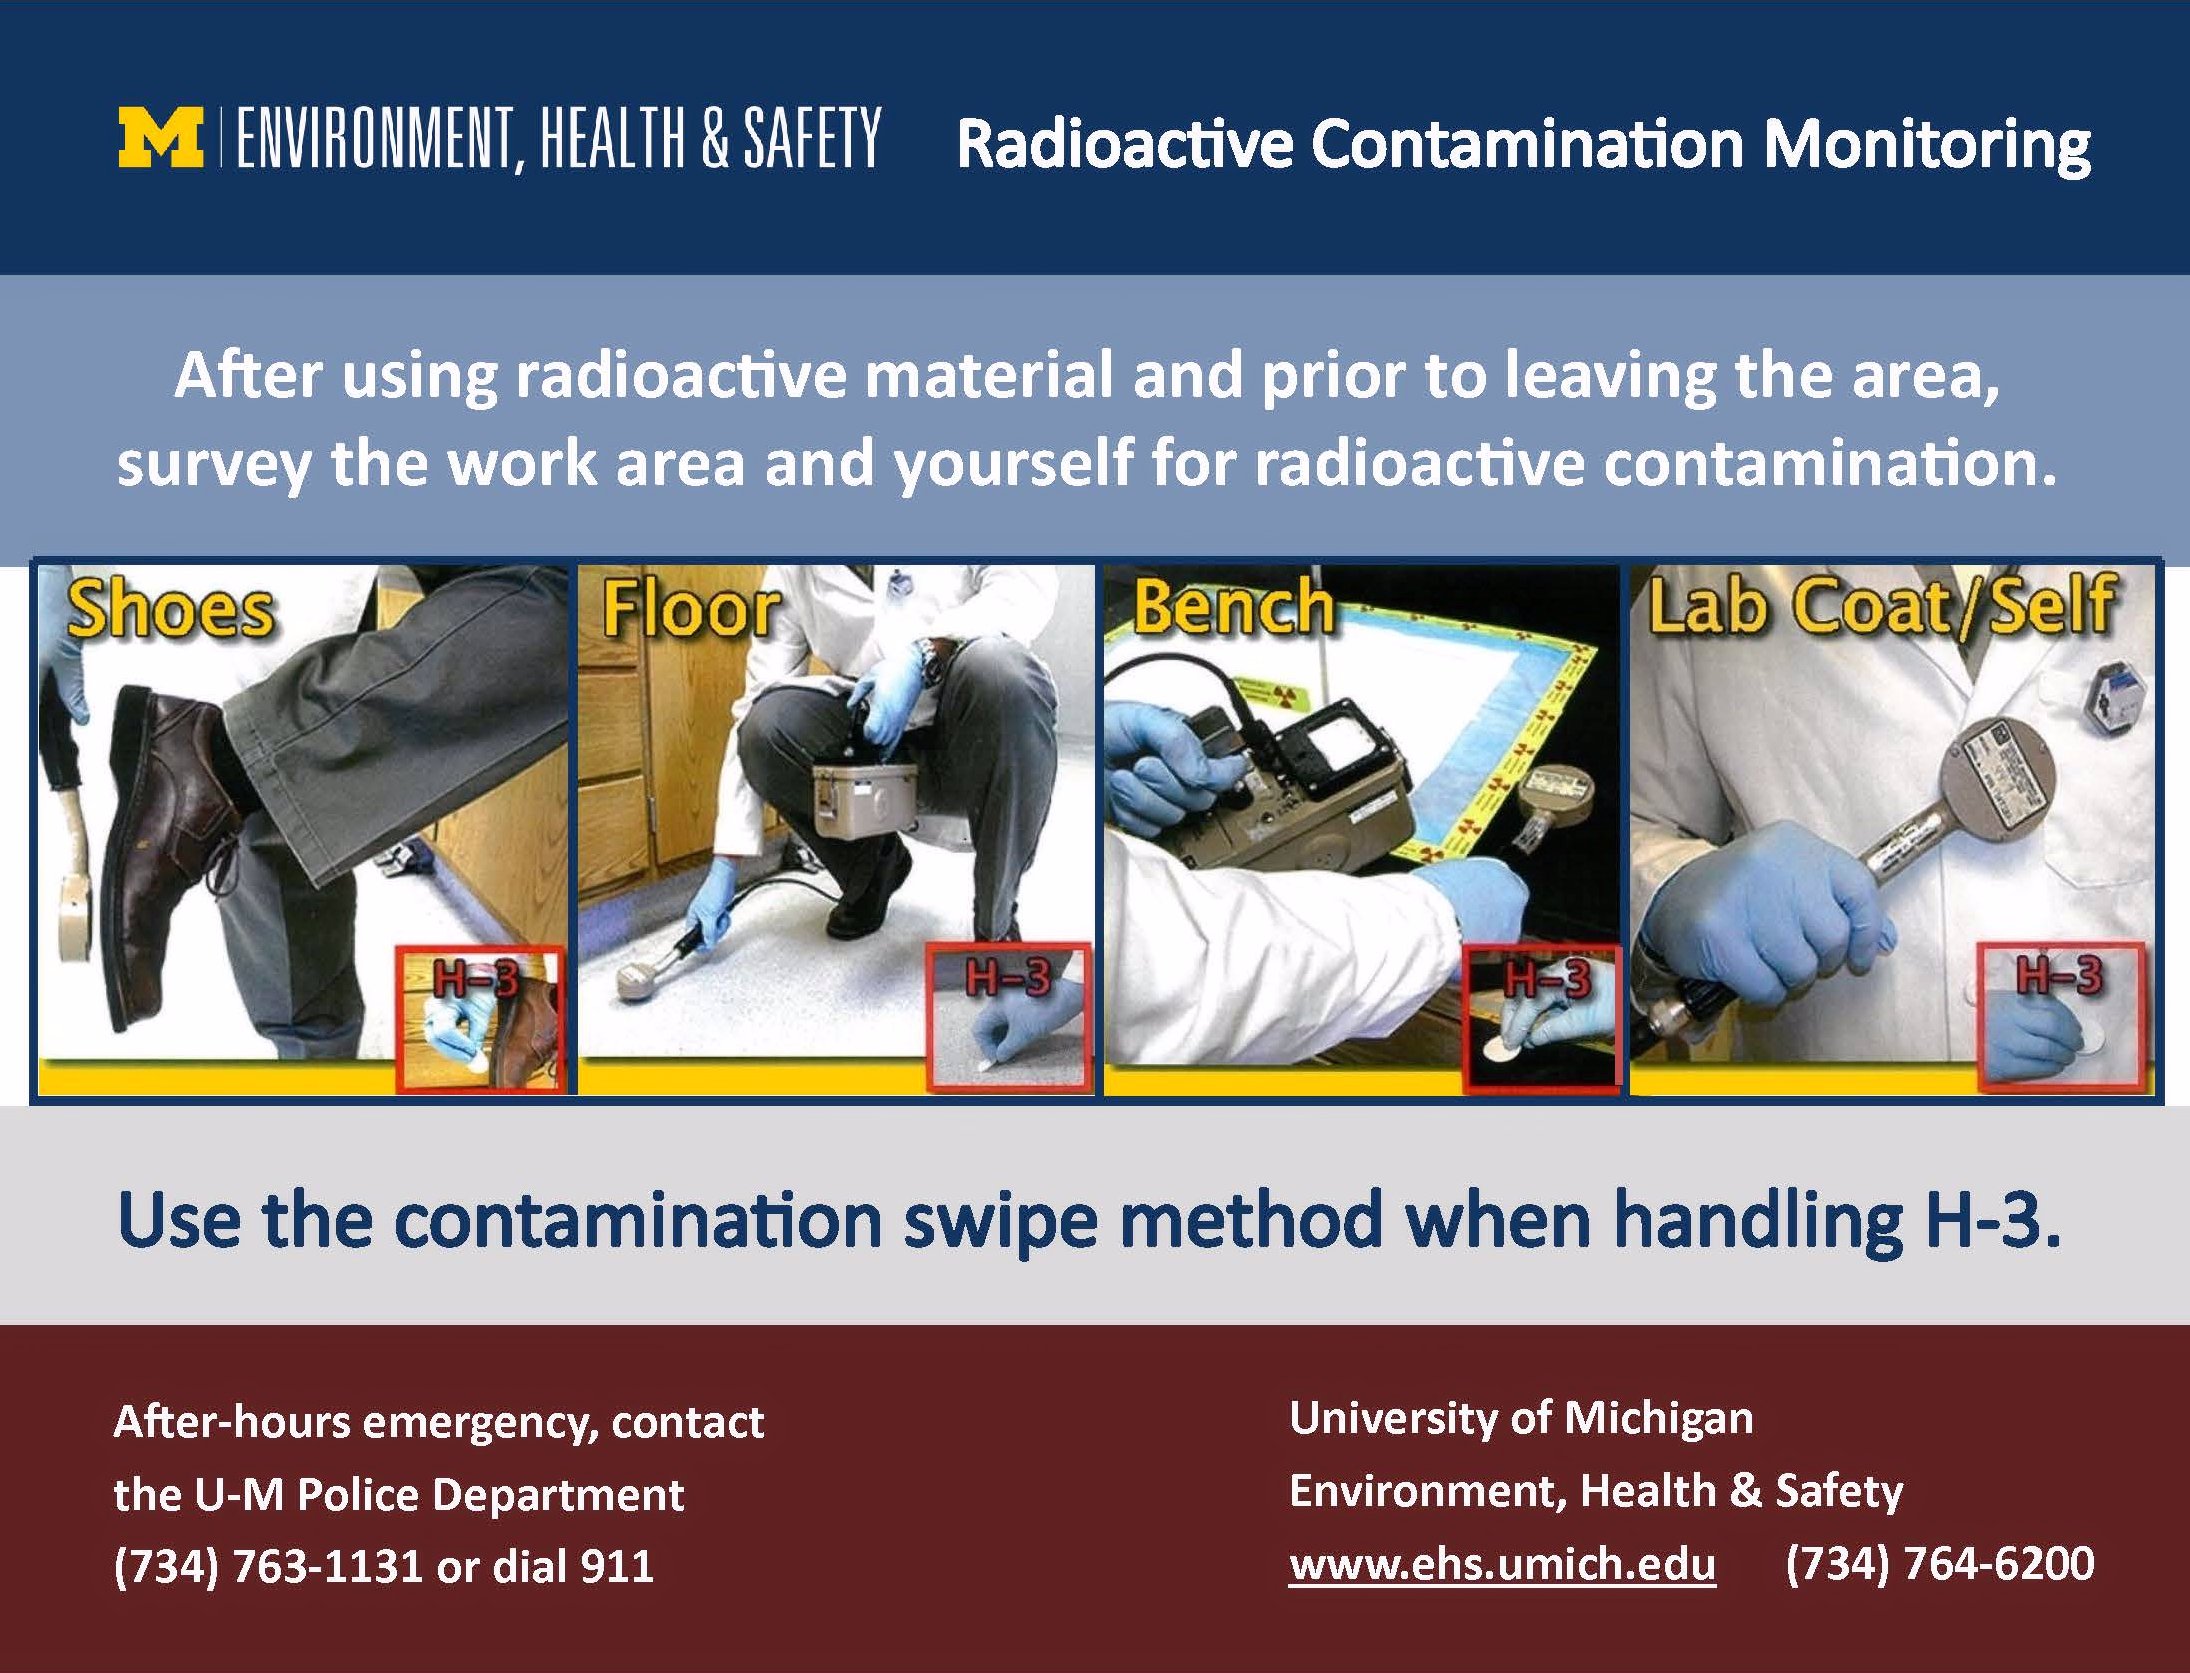 What are the basic measures in radiation protection? - Rincón educativo